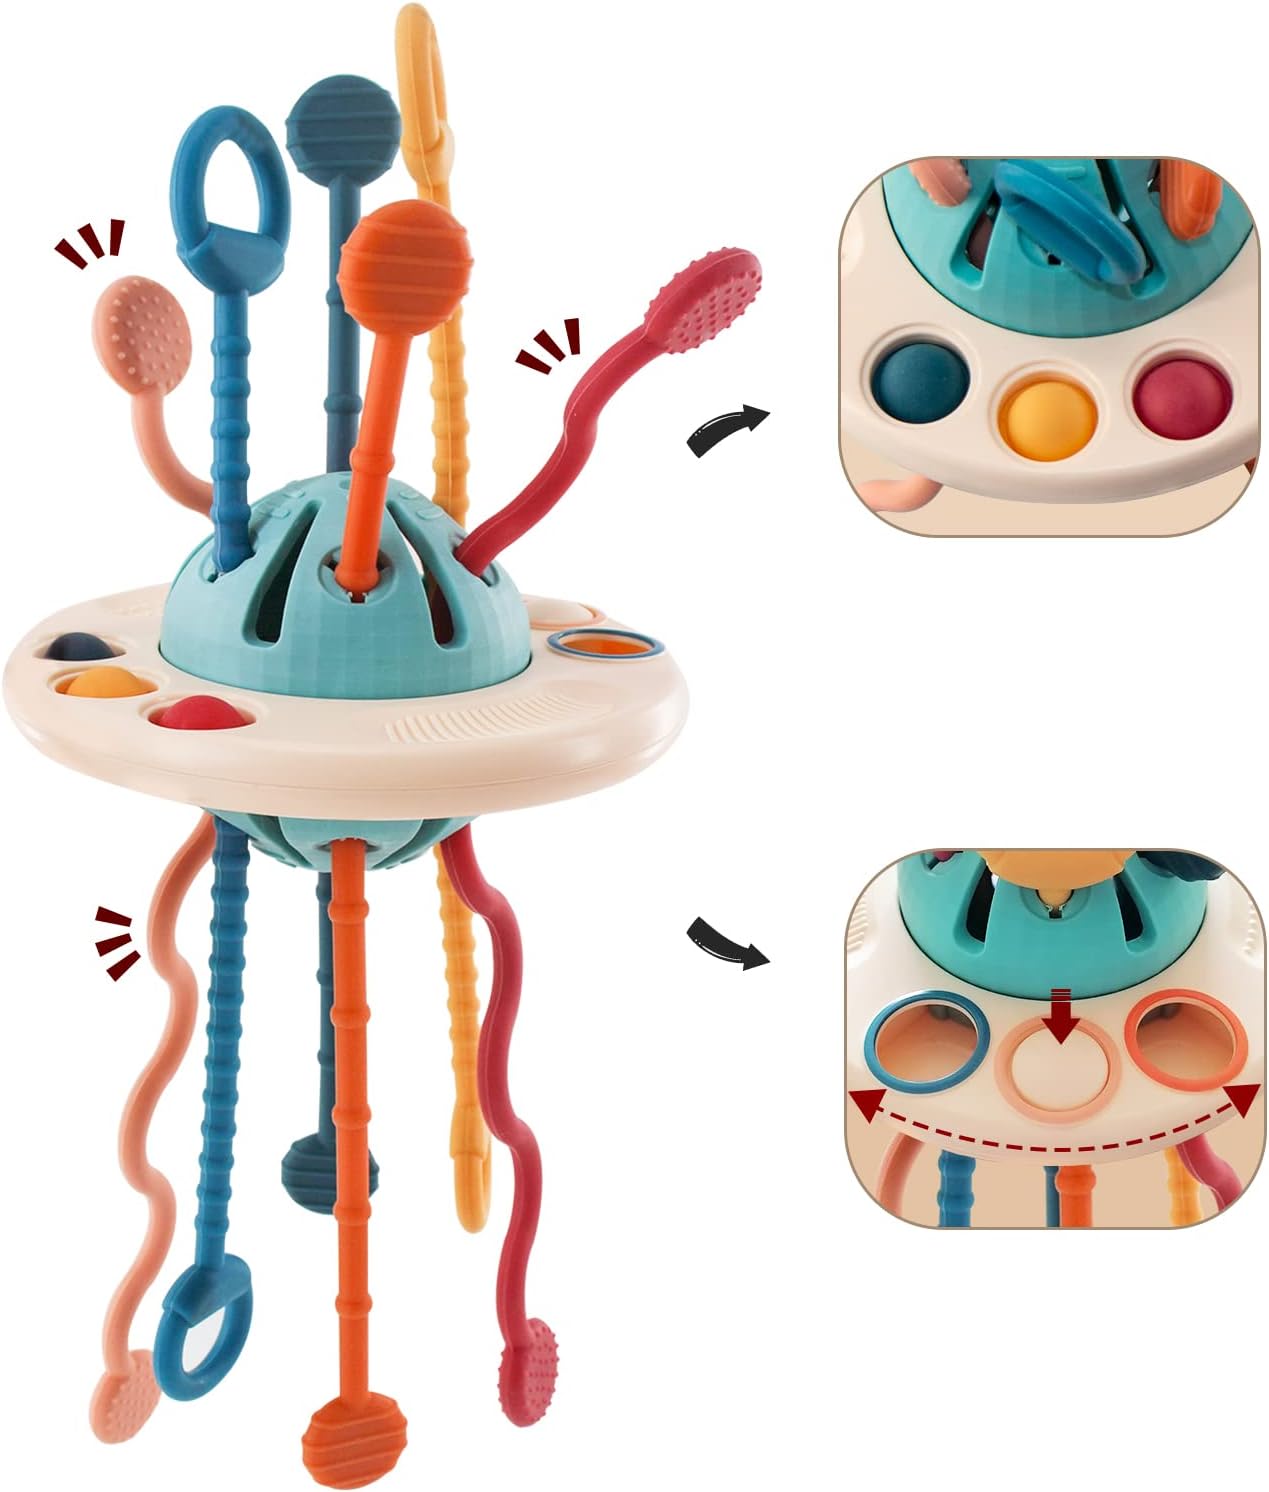 3-in-1 Sensory Baby Toy - PlaySens™